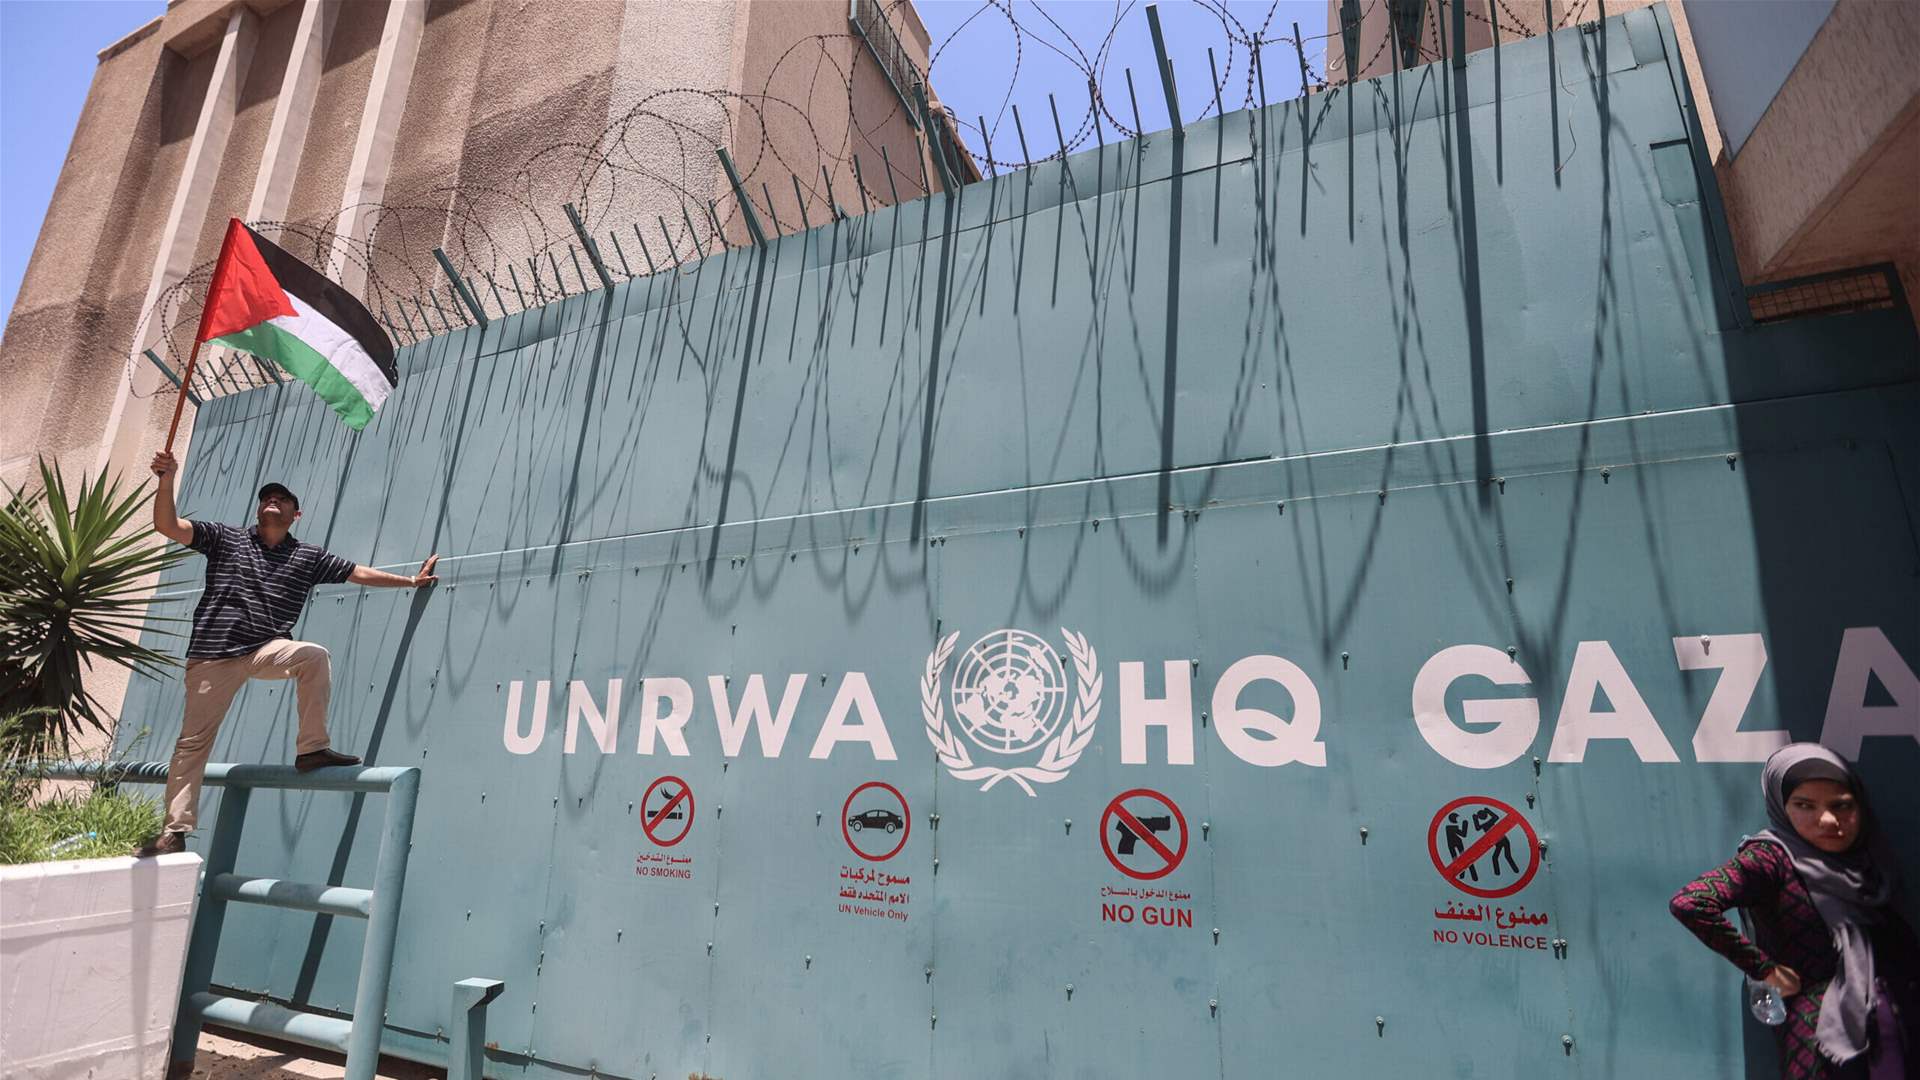 Moscow Deems Suspension of UNRWA Funding as &quot;Collective Punishment&quot;